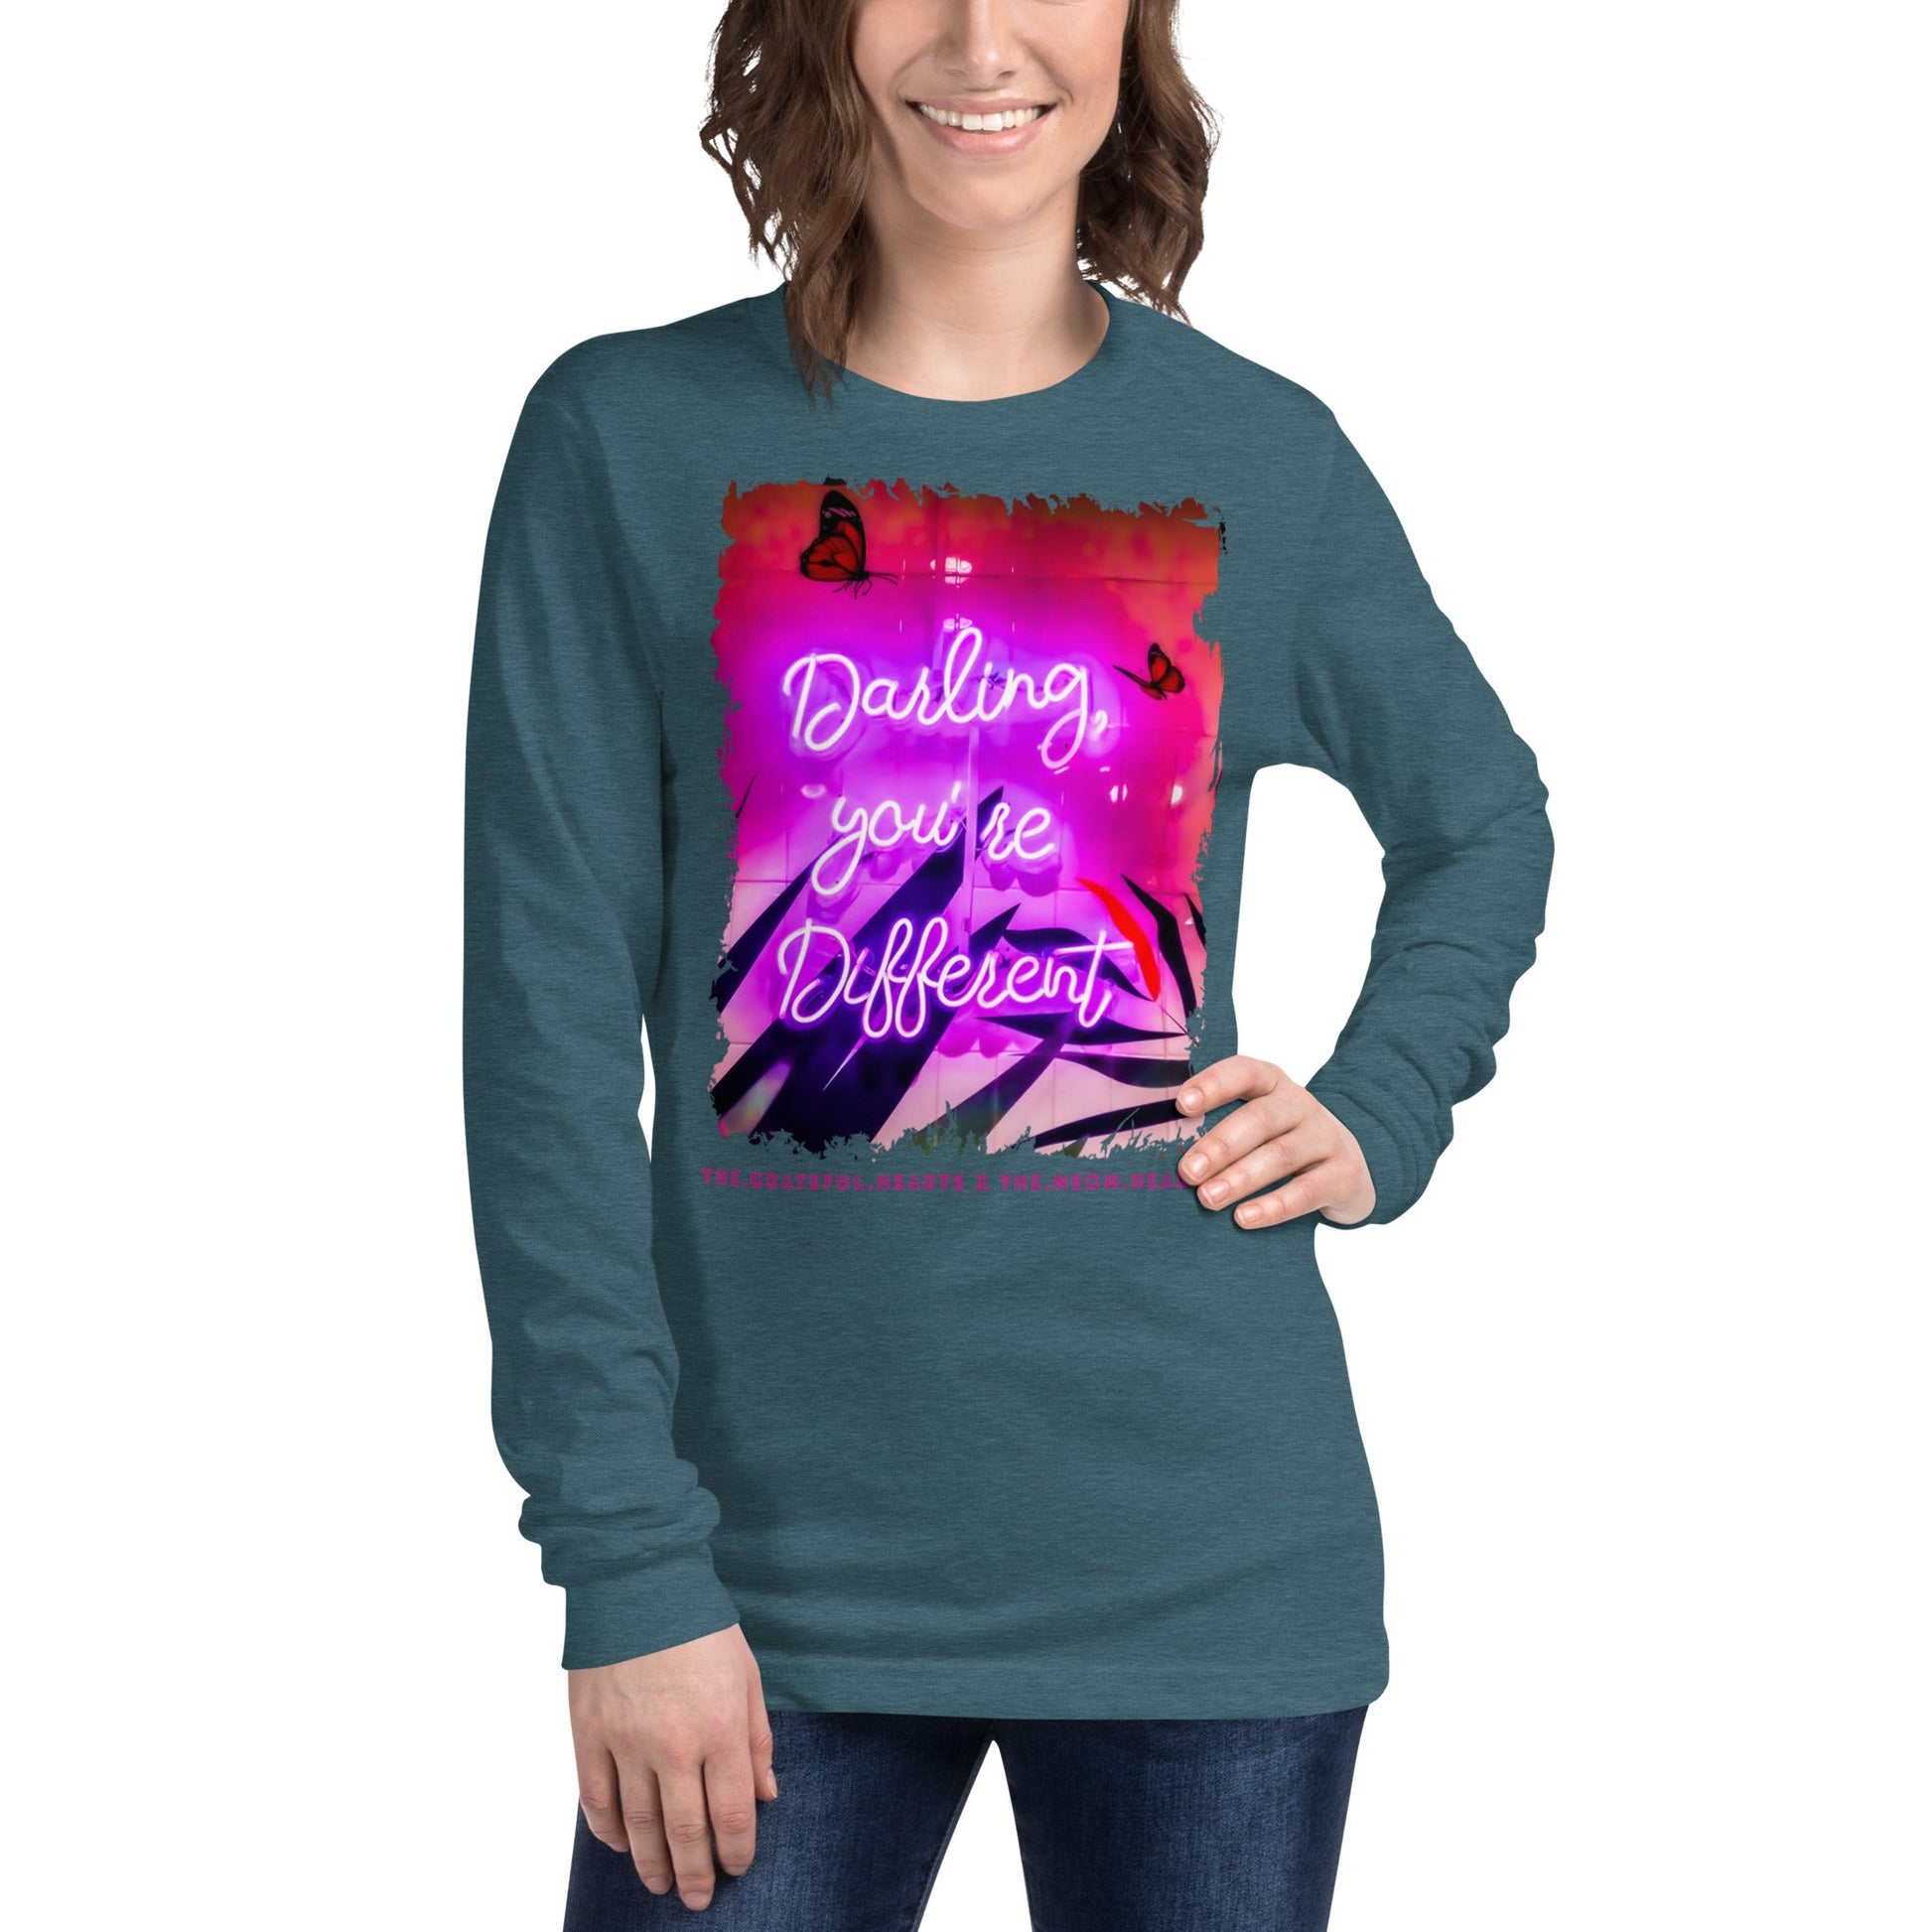 Darling You're Different ❤️ - Unisex Long Sleeve t-shirt (Available in Various Colors 💖💙💜) - The Grateful Hearts